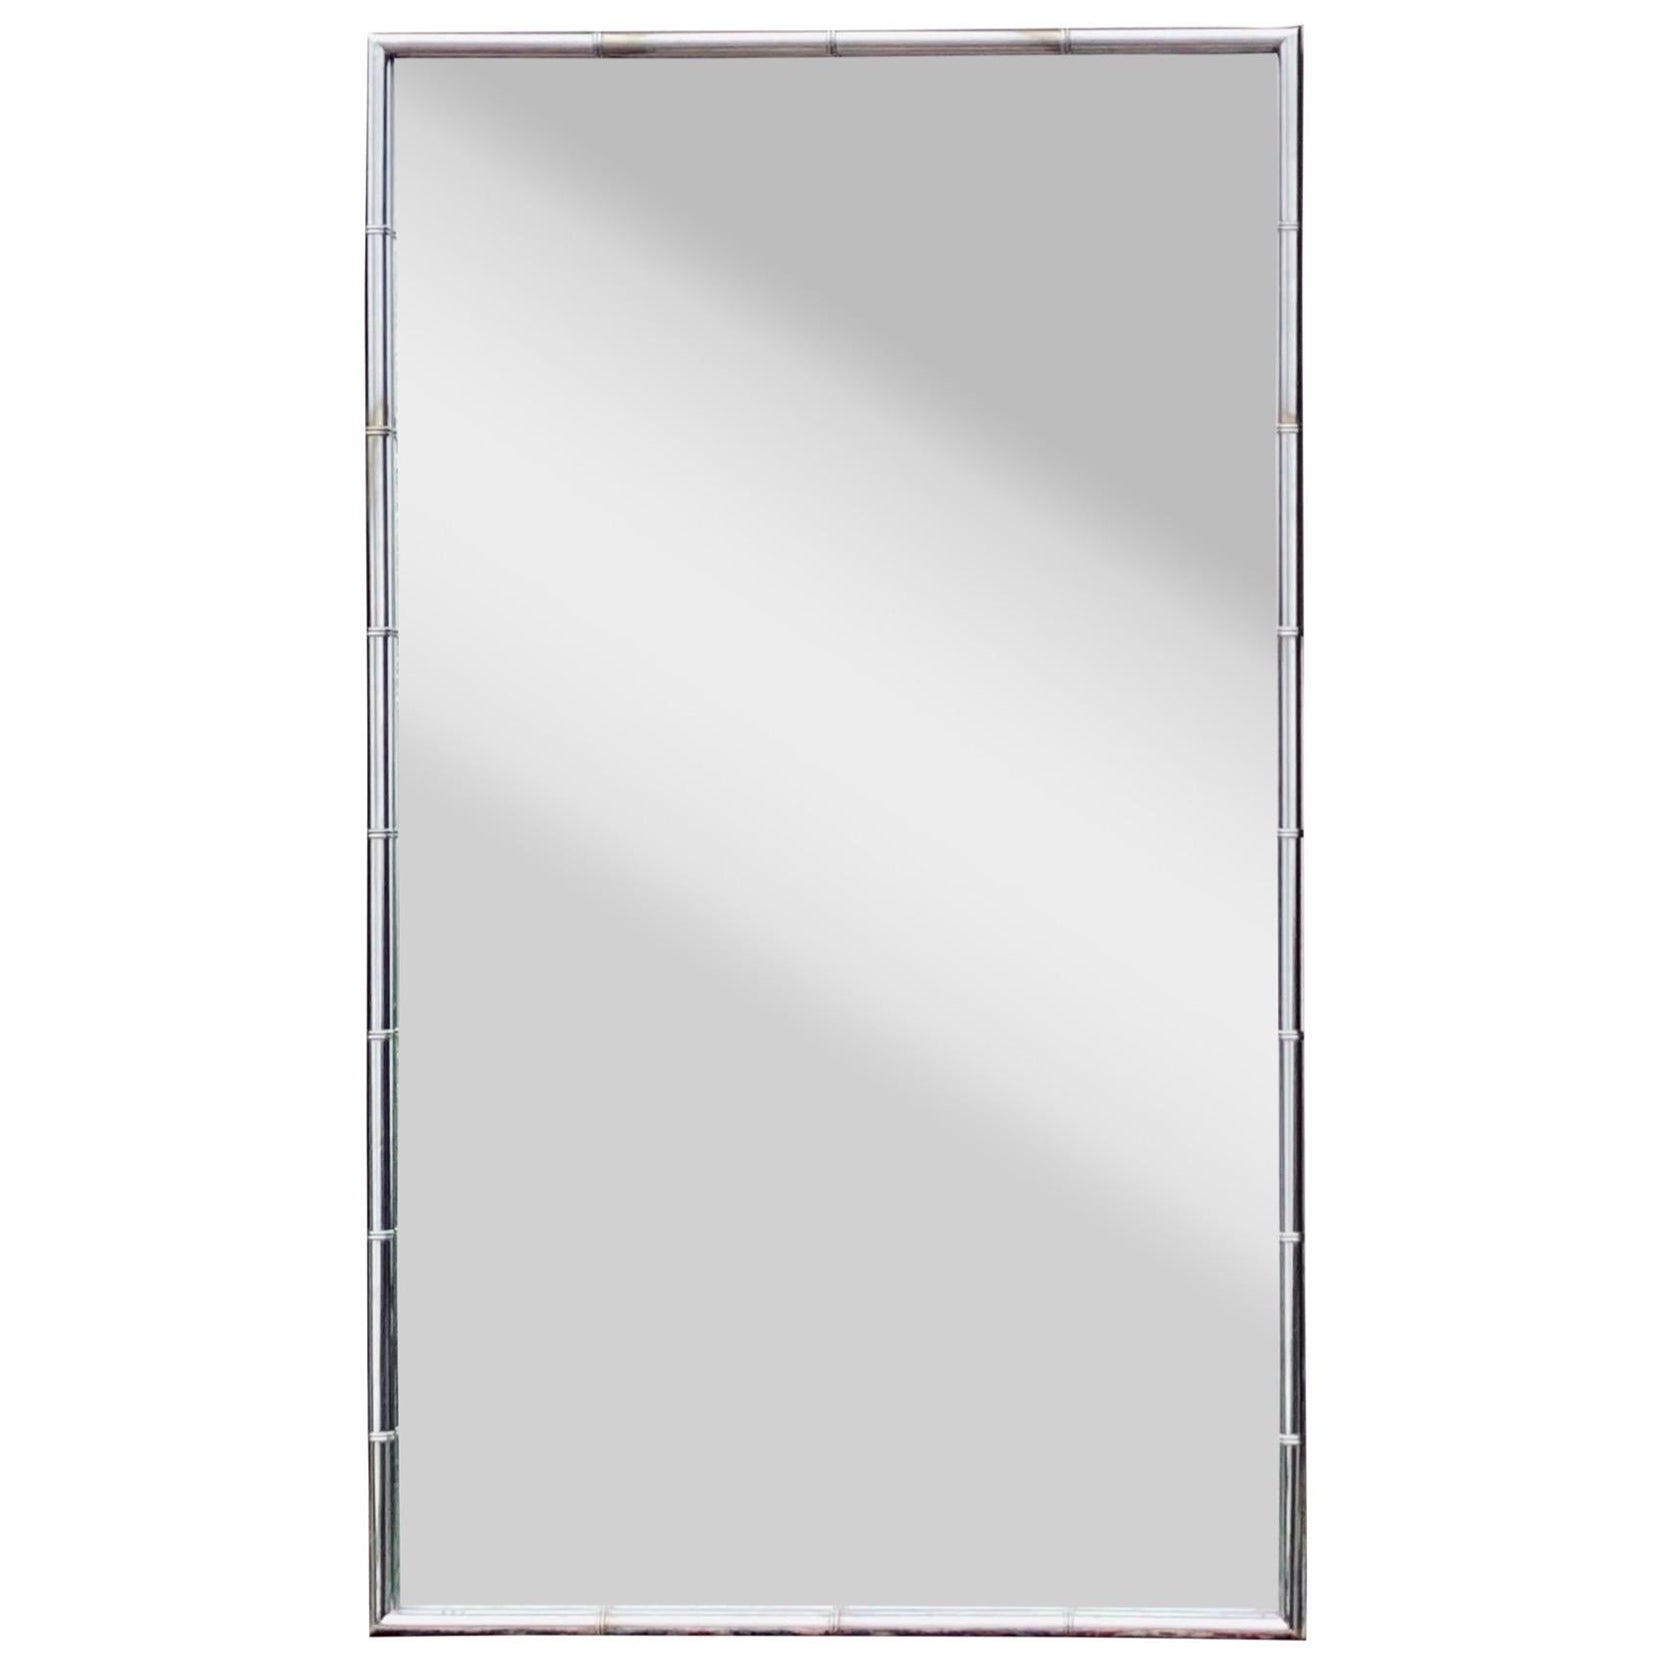 1960s Chrome Faux Bamboo Rectangular Wall Mirror For Sale